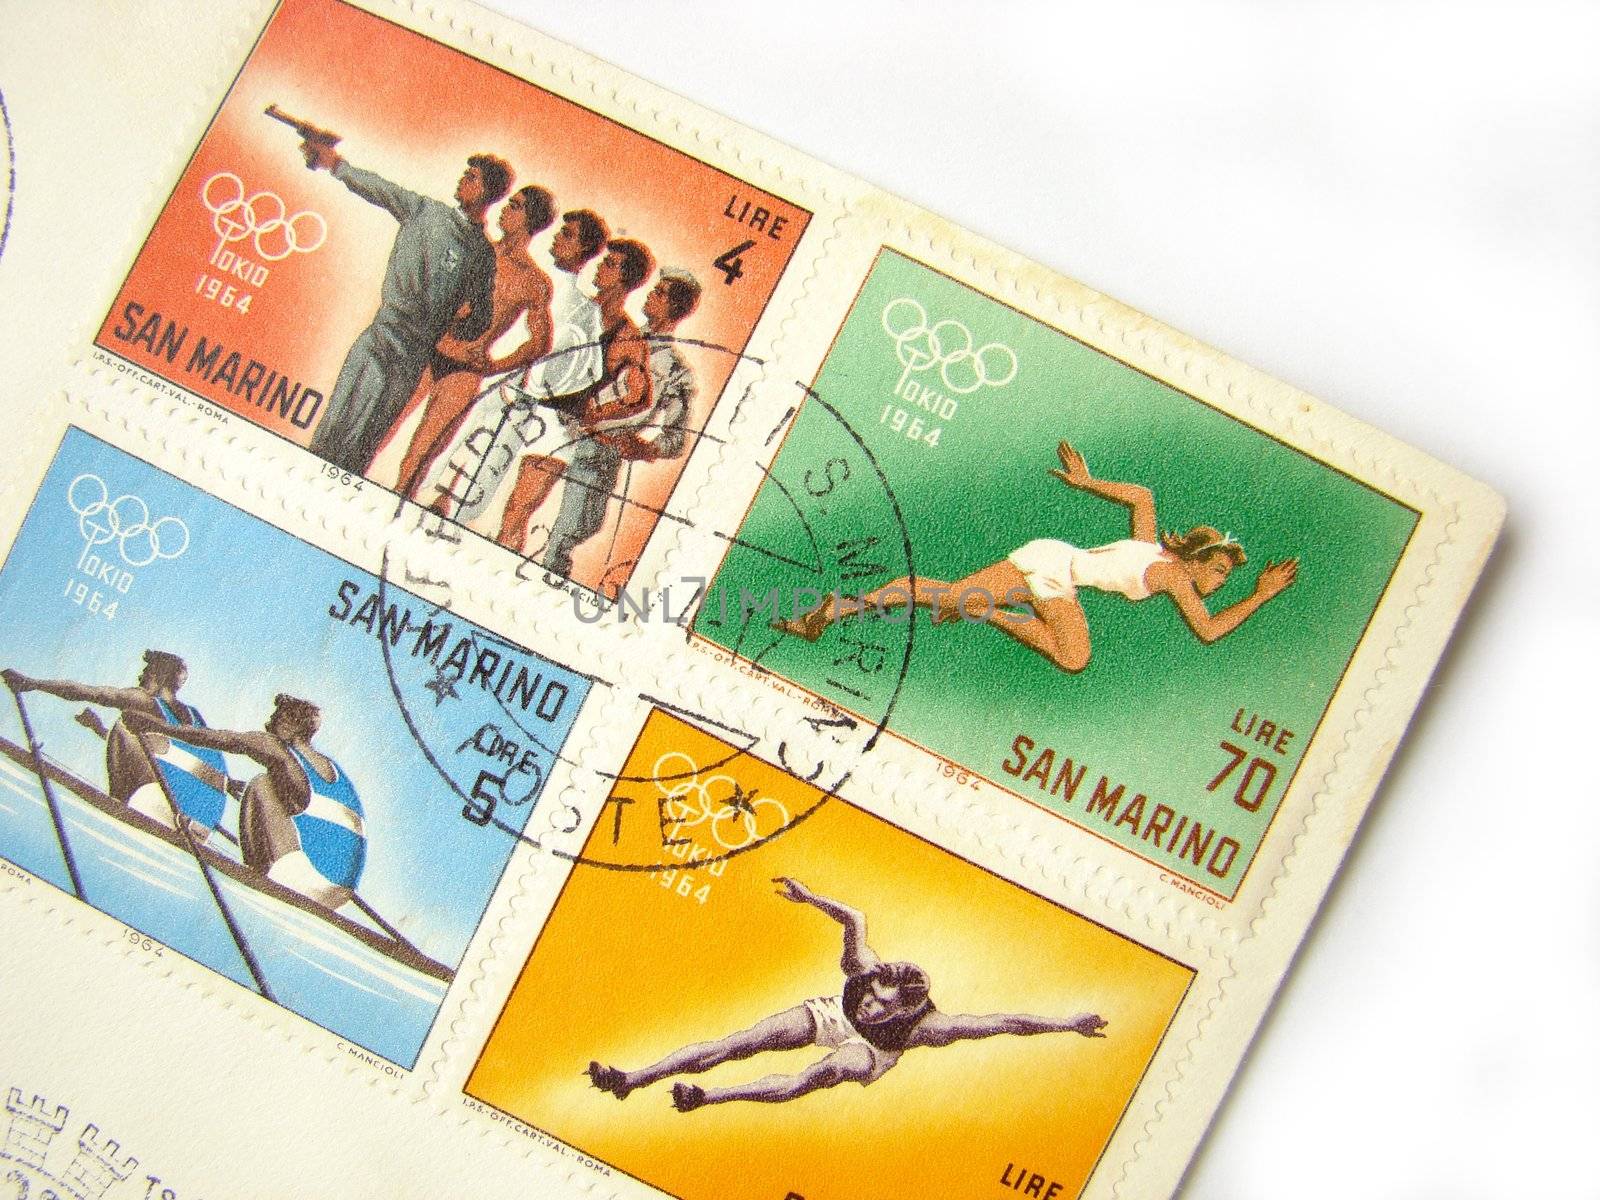 San Marino postage stamps on envelope by Flaps